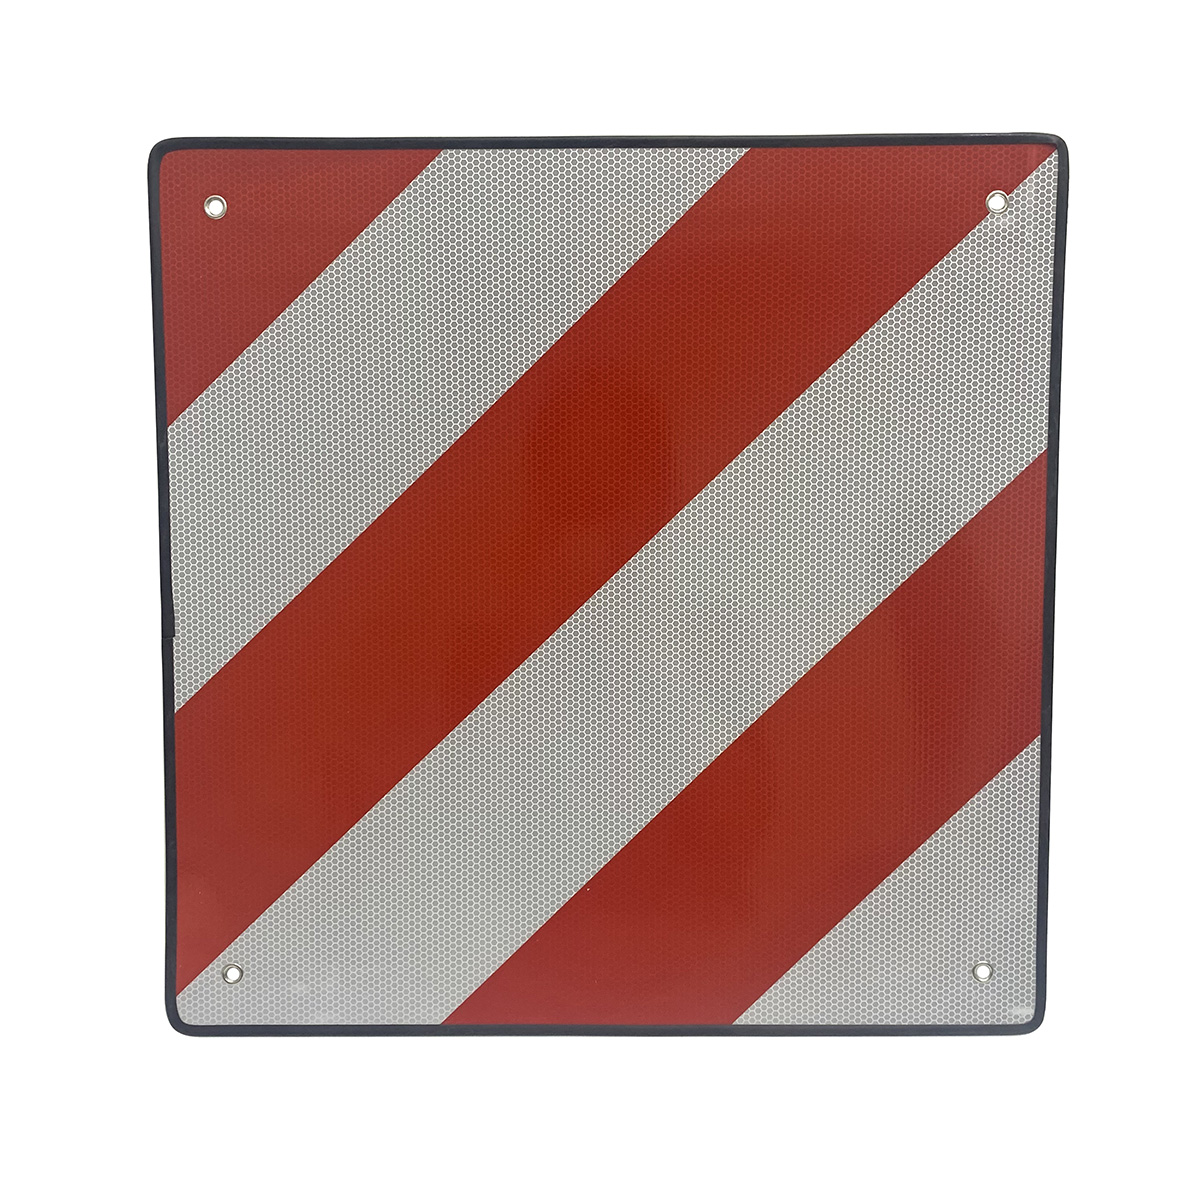 50x50cm Reflective Vehicles Rear Plate with Rubber Edge